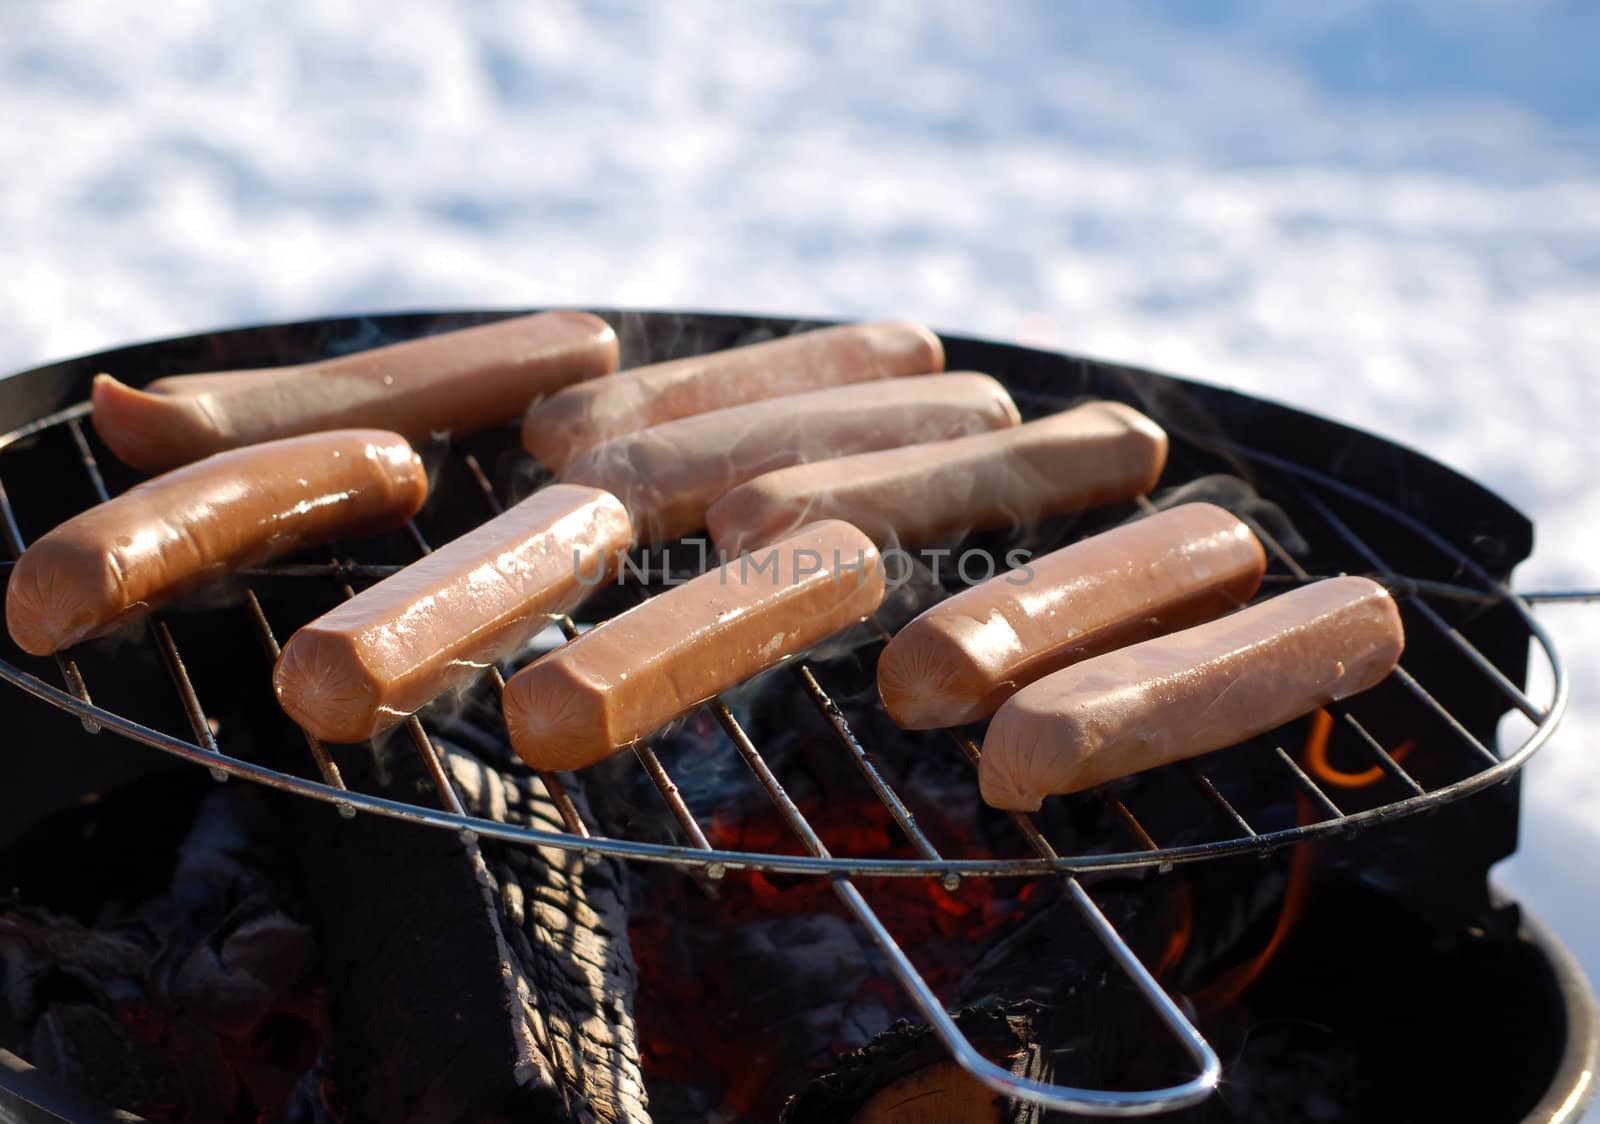 sausages on a grill by mojly